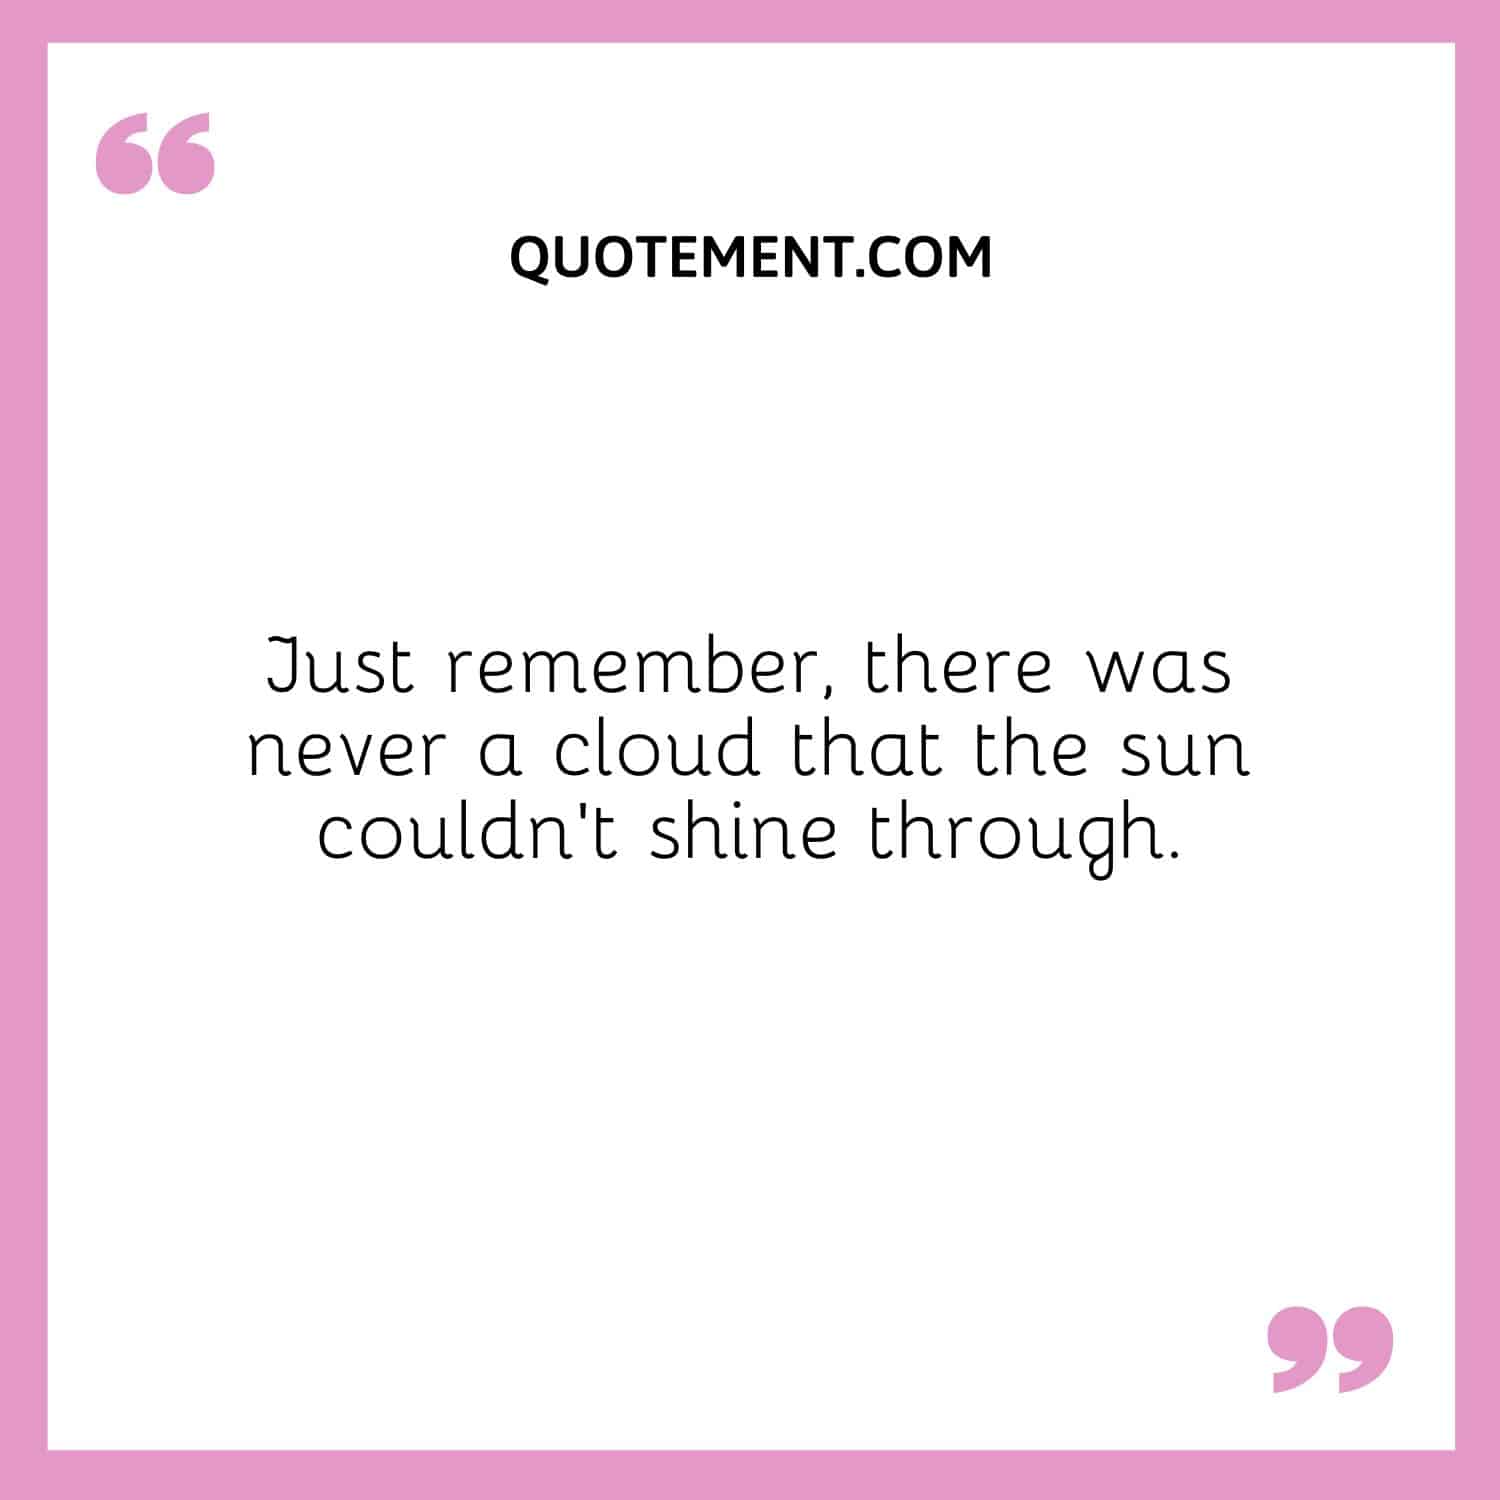 Just remember, there was never a cloud that the sun couldn’t shine through.